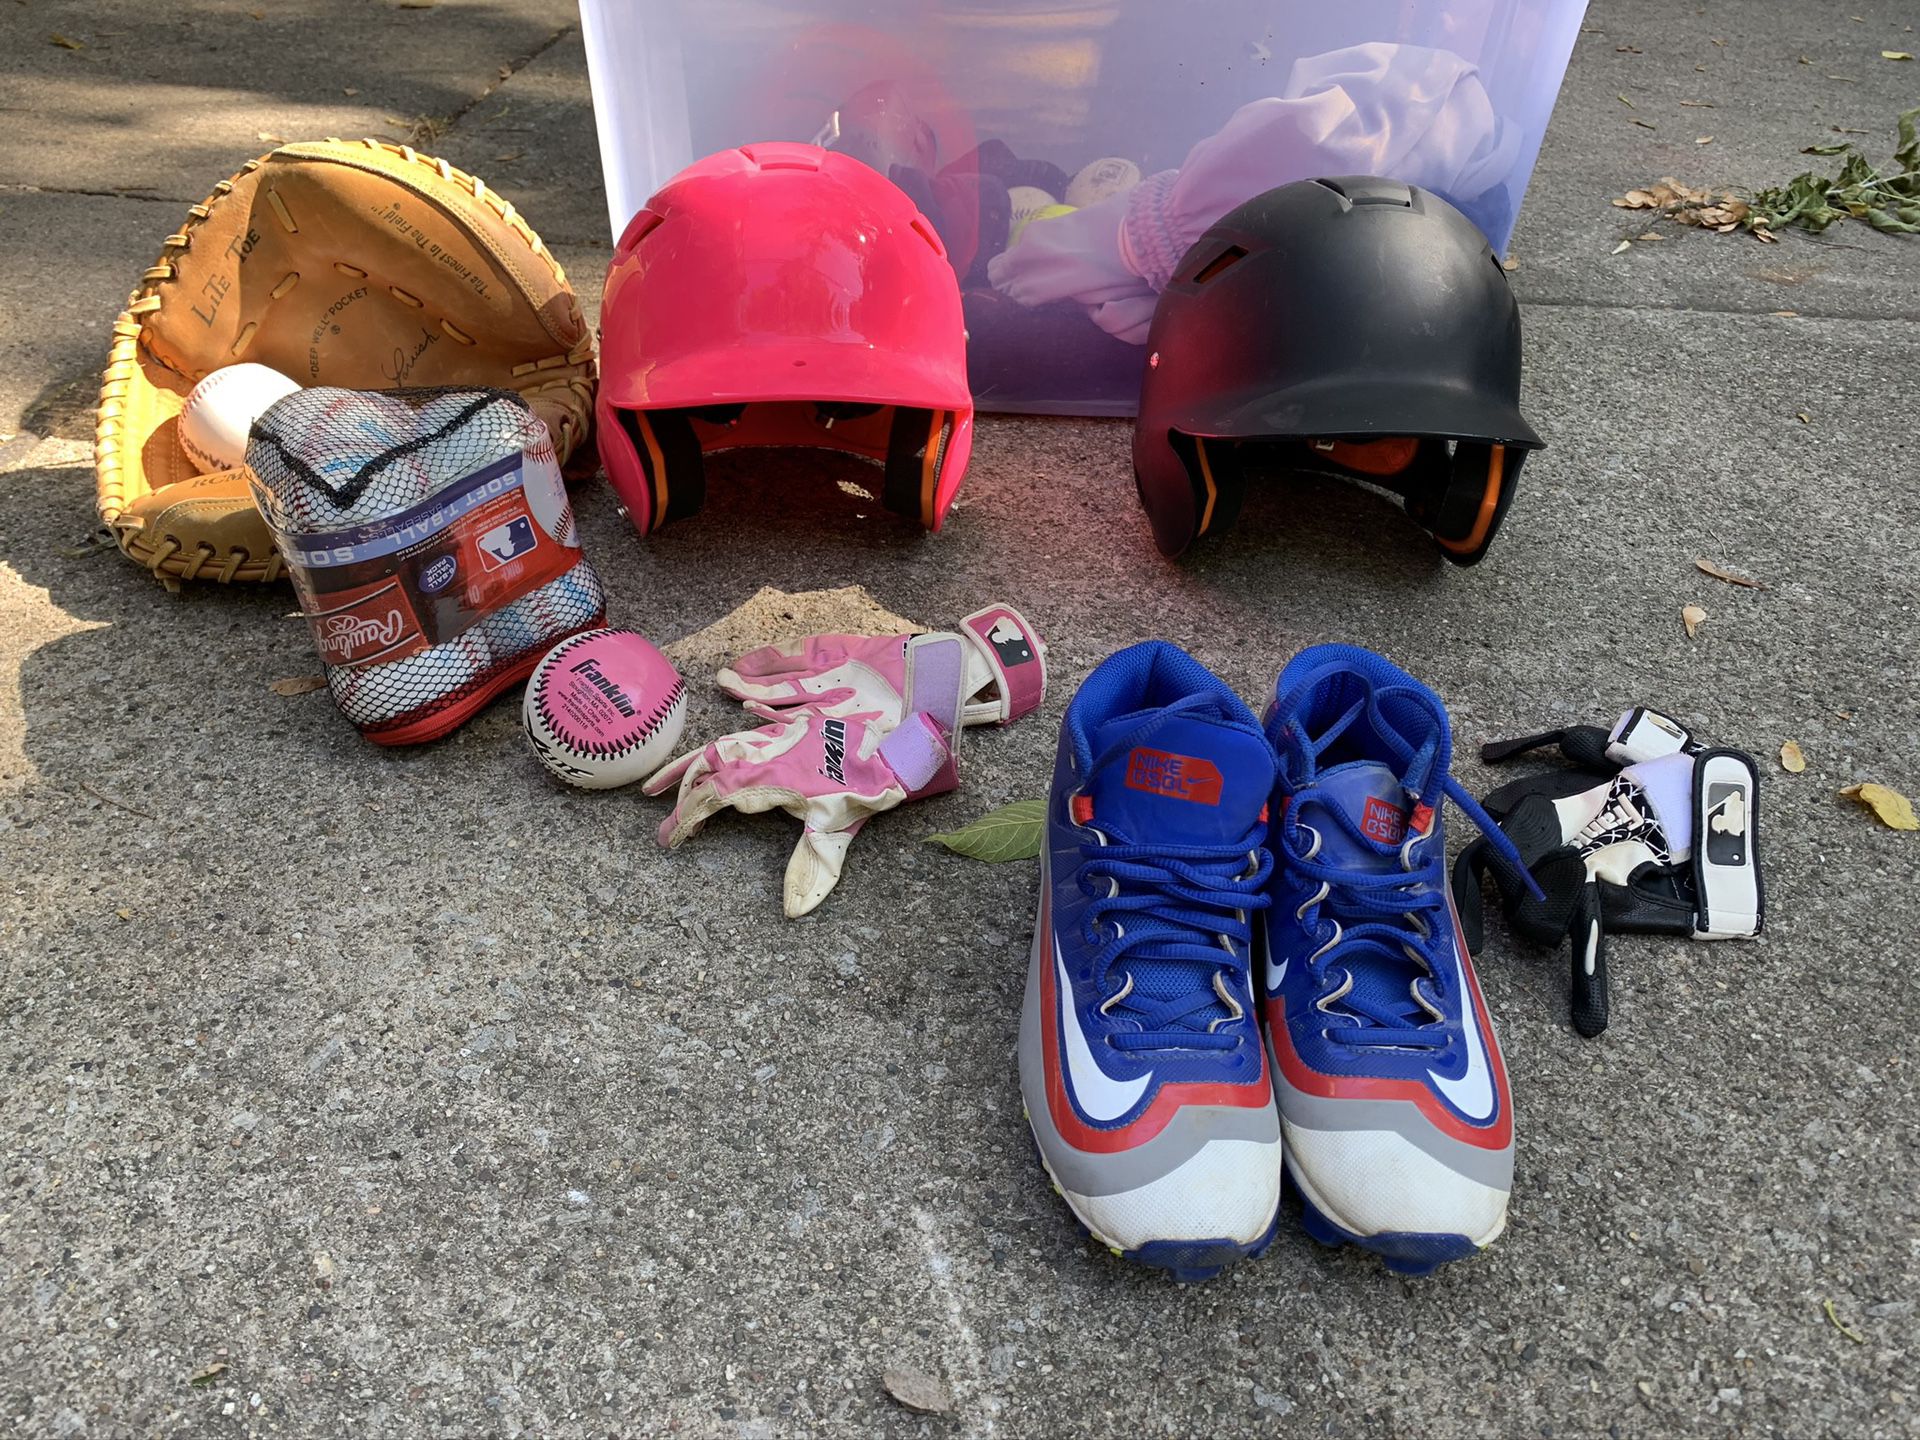 Two Baseball Batting Helmets, gloves, and other equipment